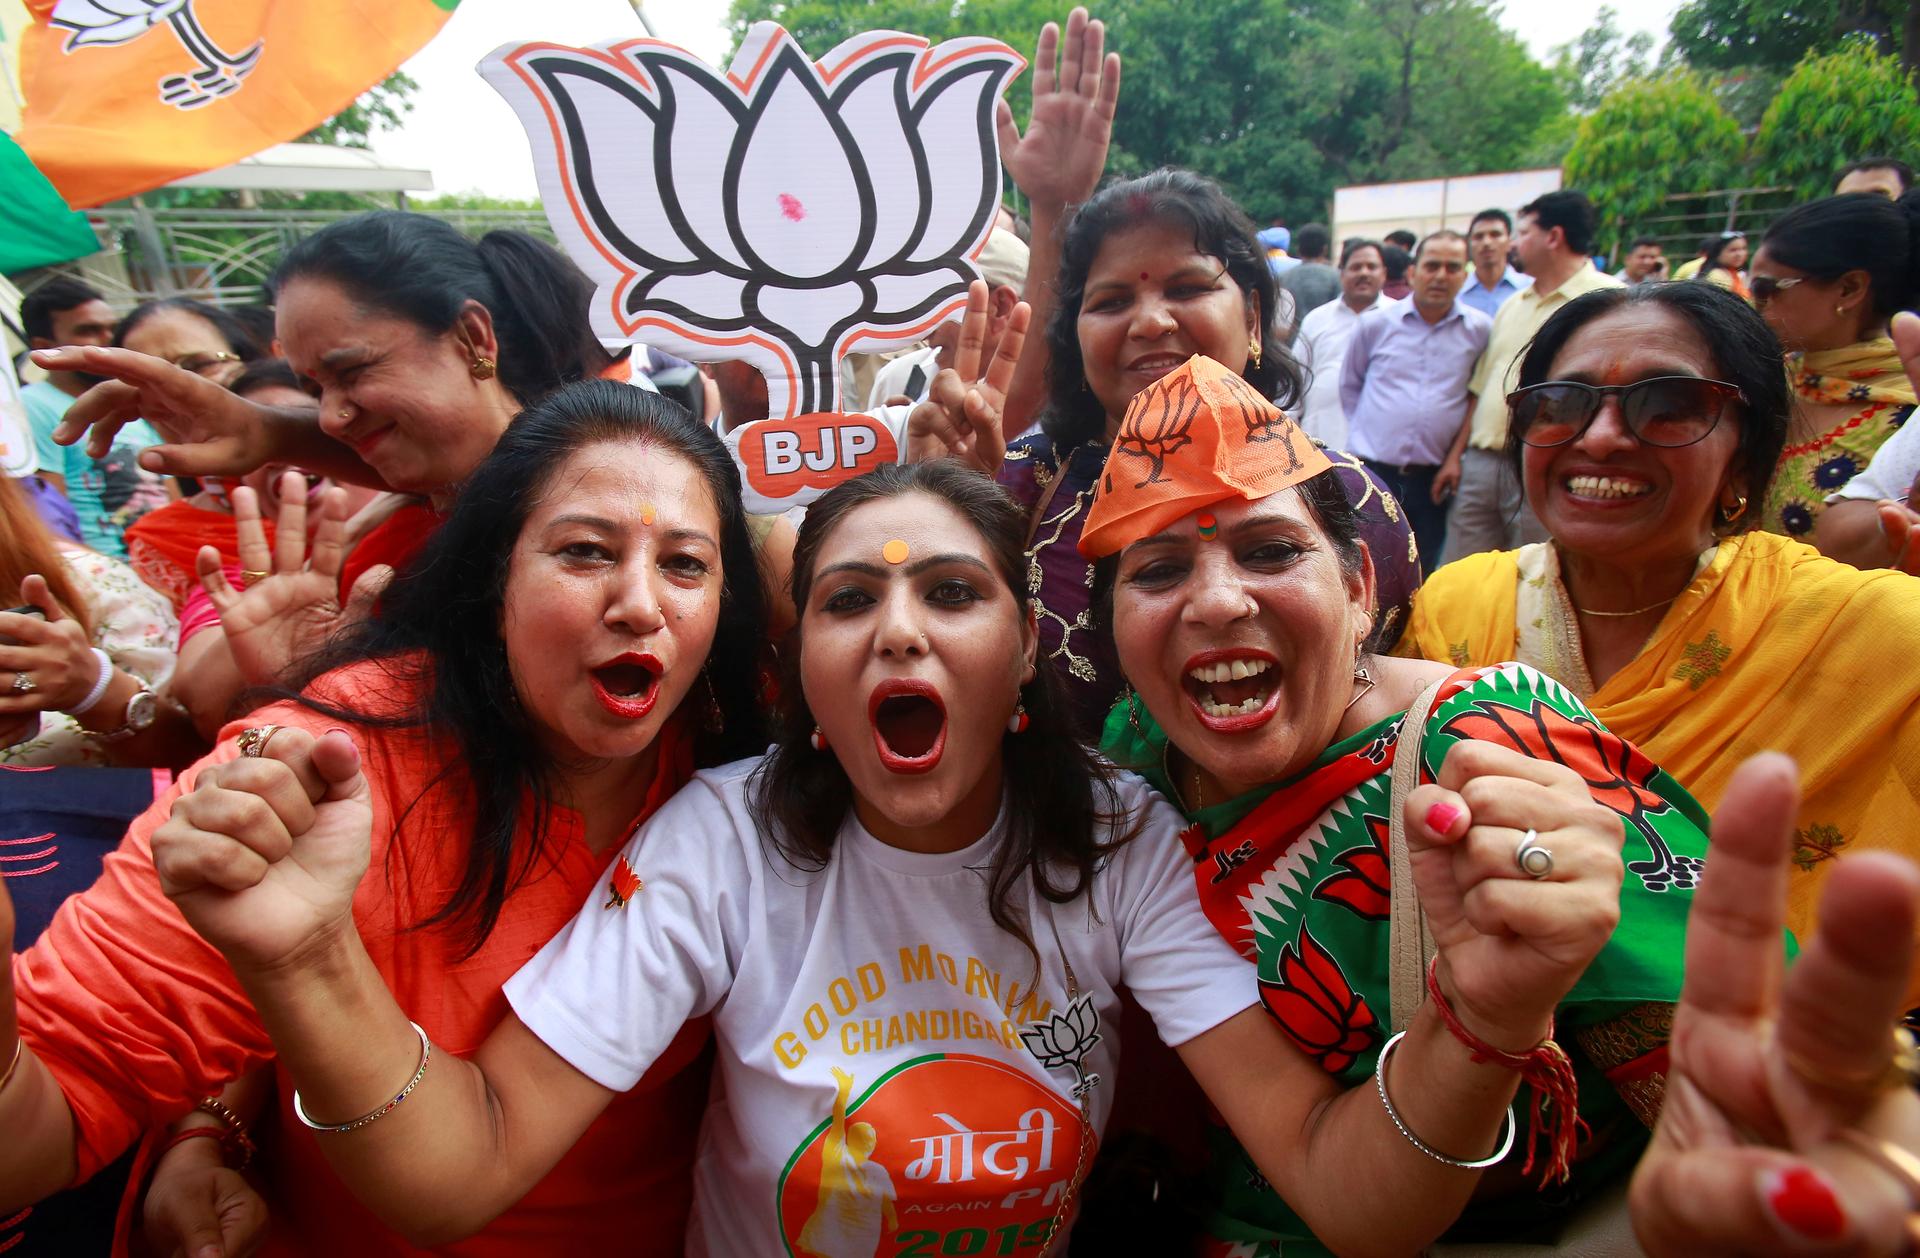 Three women cheer during election results in India wearing orange for BJP.